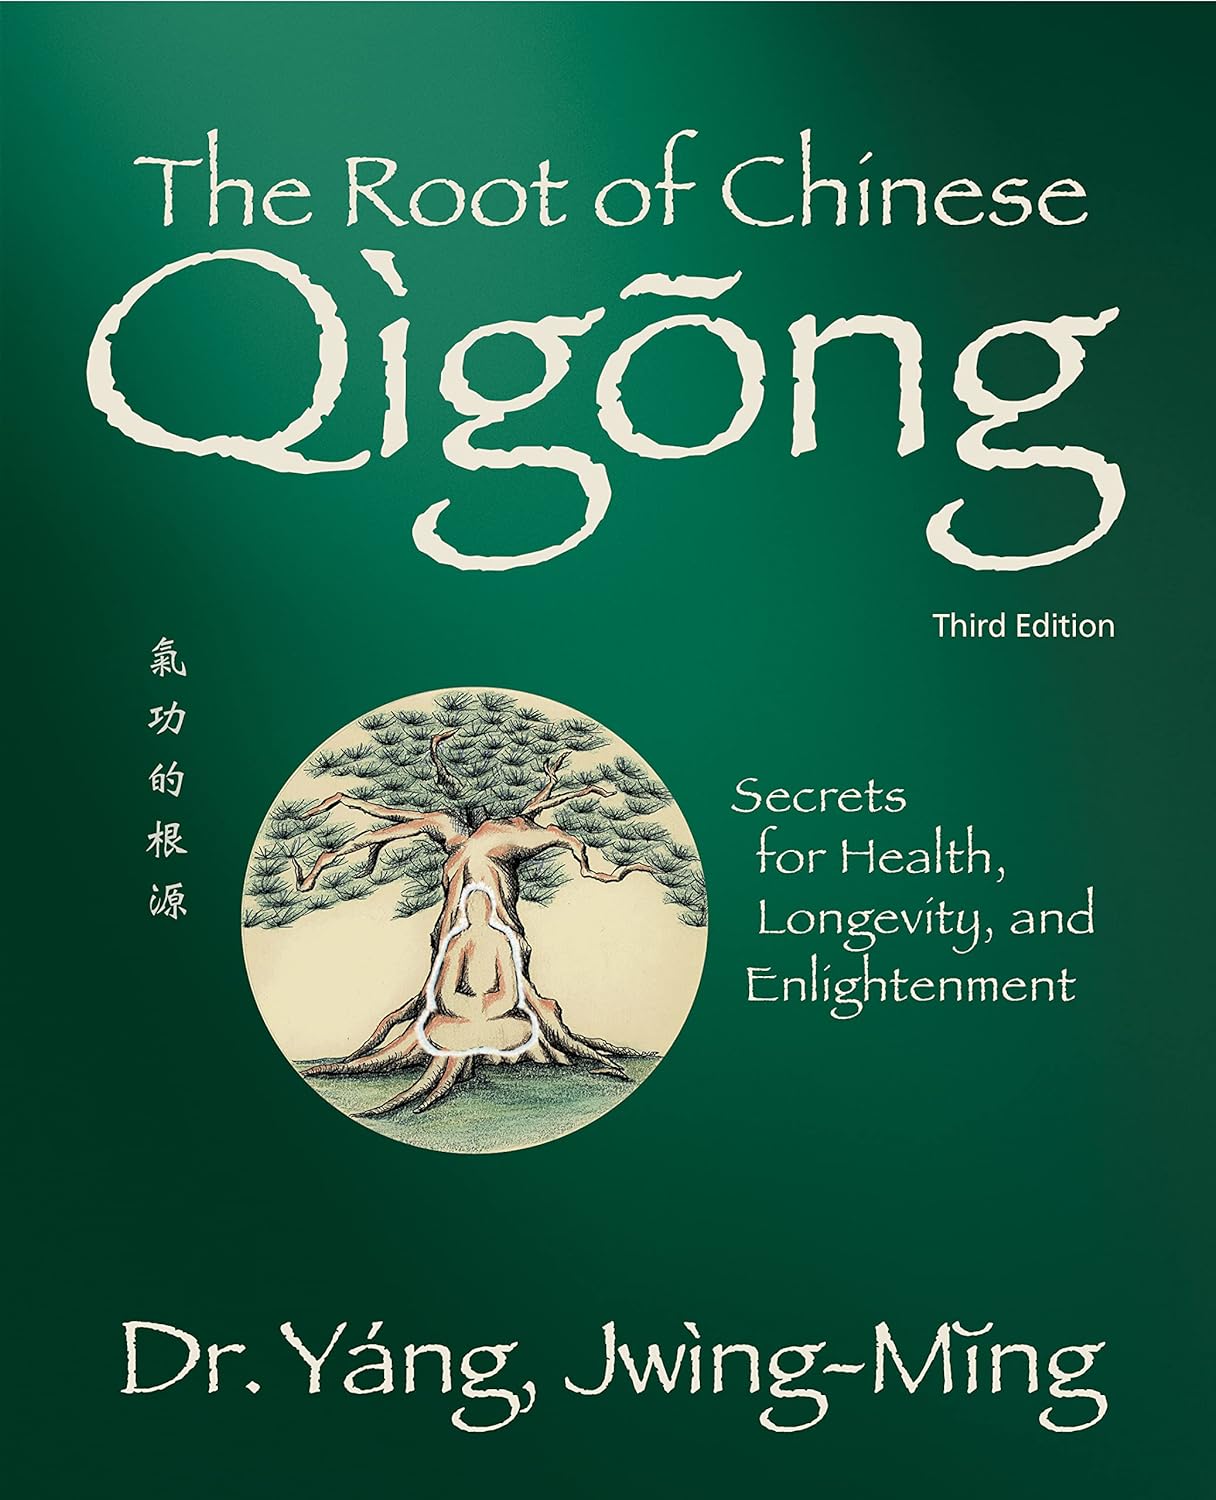 The Root of Chinese Qigong (Qigong Foundation) Book by Dr Yang, Jwing-Ming (3rd Edition)